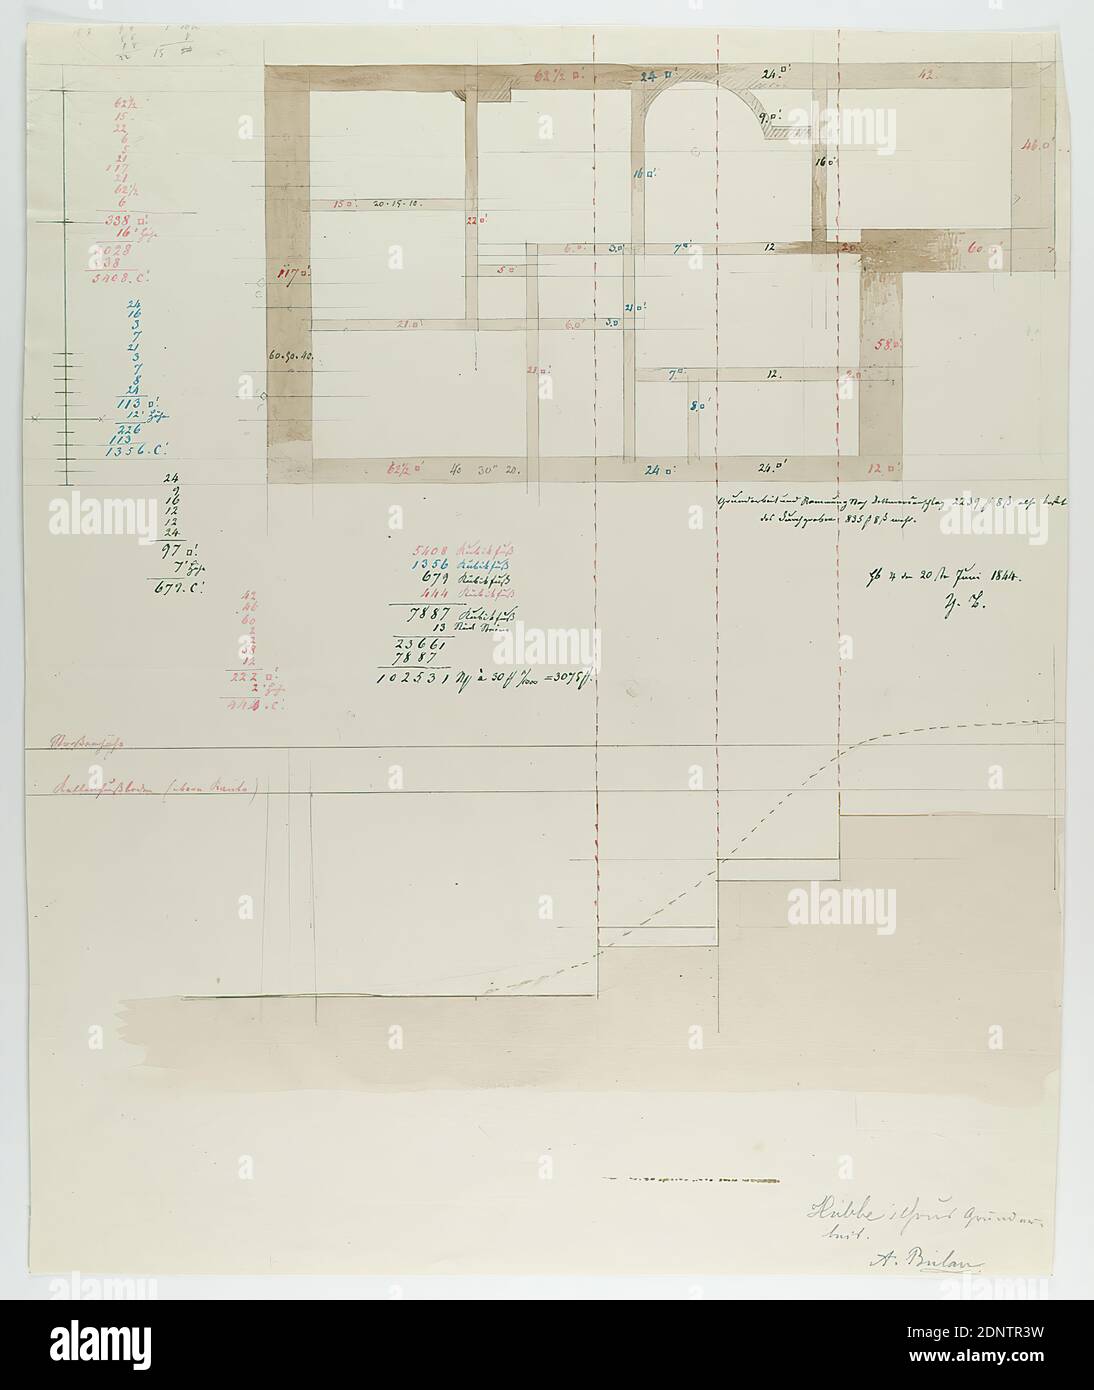 Theodor Bülau, Hübbe'sche Haus, Ferdinandstr. 65, Hamburg. Floor plan of the foundation walls, paper, pen, ink, pencil, pen and ink drawing, washed, sheet size: height: 40 cm; width: 32,8 cm, signed, dated and inscribed: recto: in ink: Hb. ♃ [Jupiter symbol] the 20th of June 1844, Th. B, inscribed: recto: in lead: Hübbe Haus, Grundarbeit. A. Bülau, design drawings, section through an architecture, draft, plan of a building Stock Photo